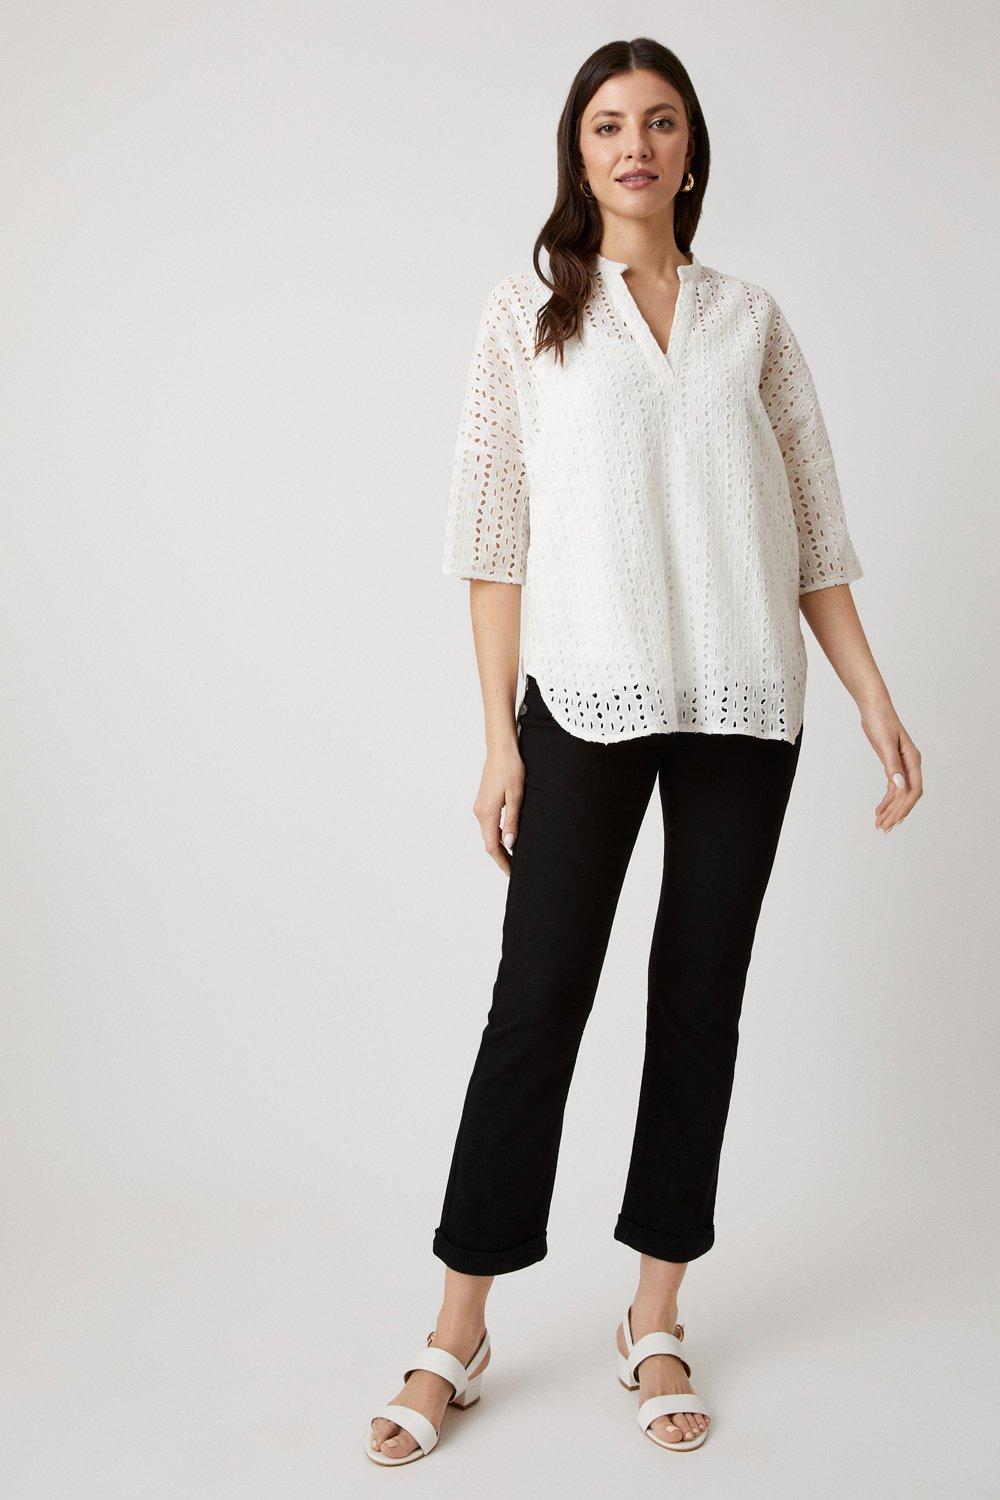 Womens Broderie Top